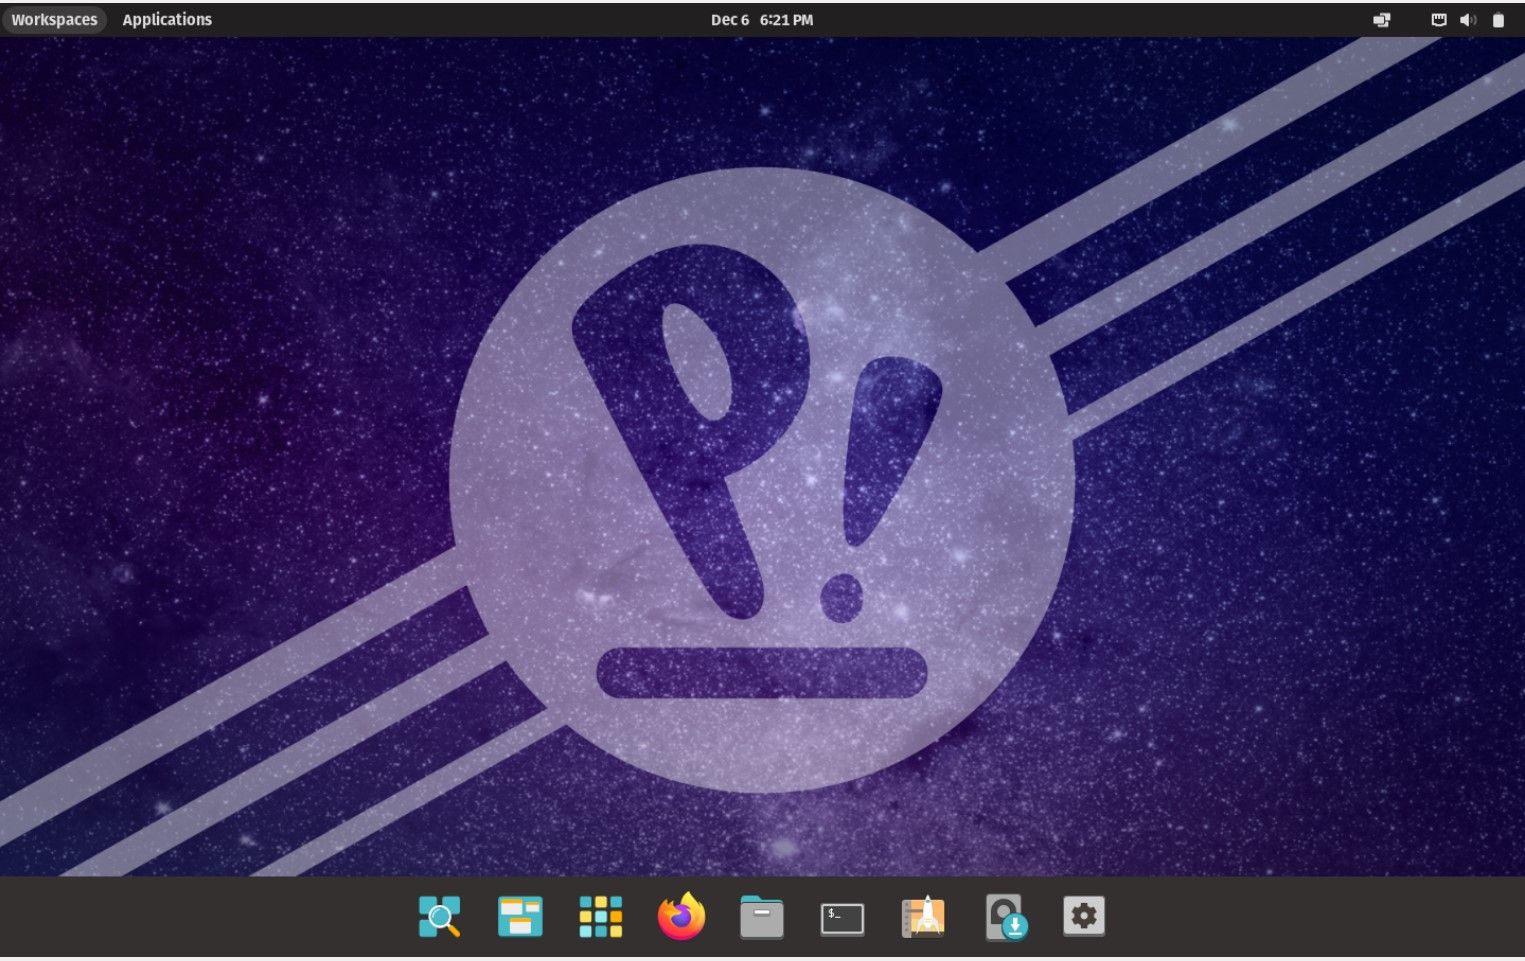 Pop!_OS desktop environment showing a band of icons